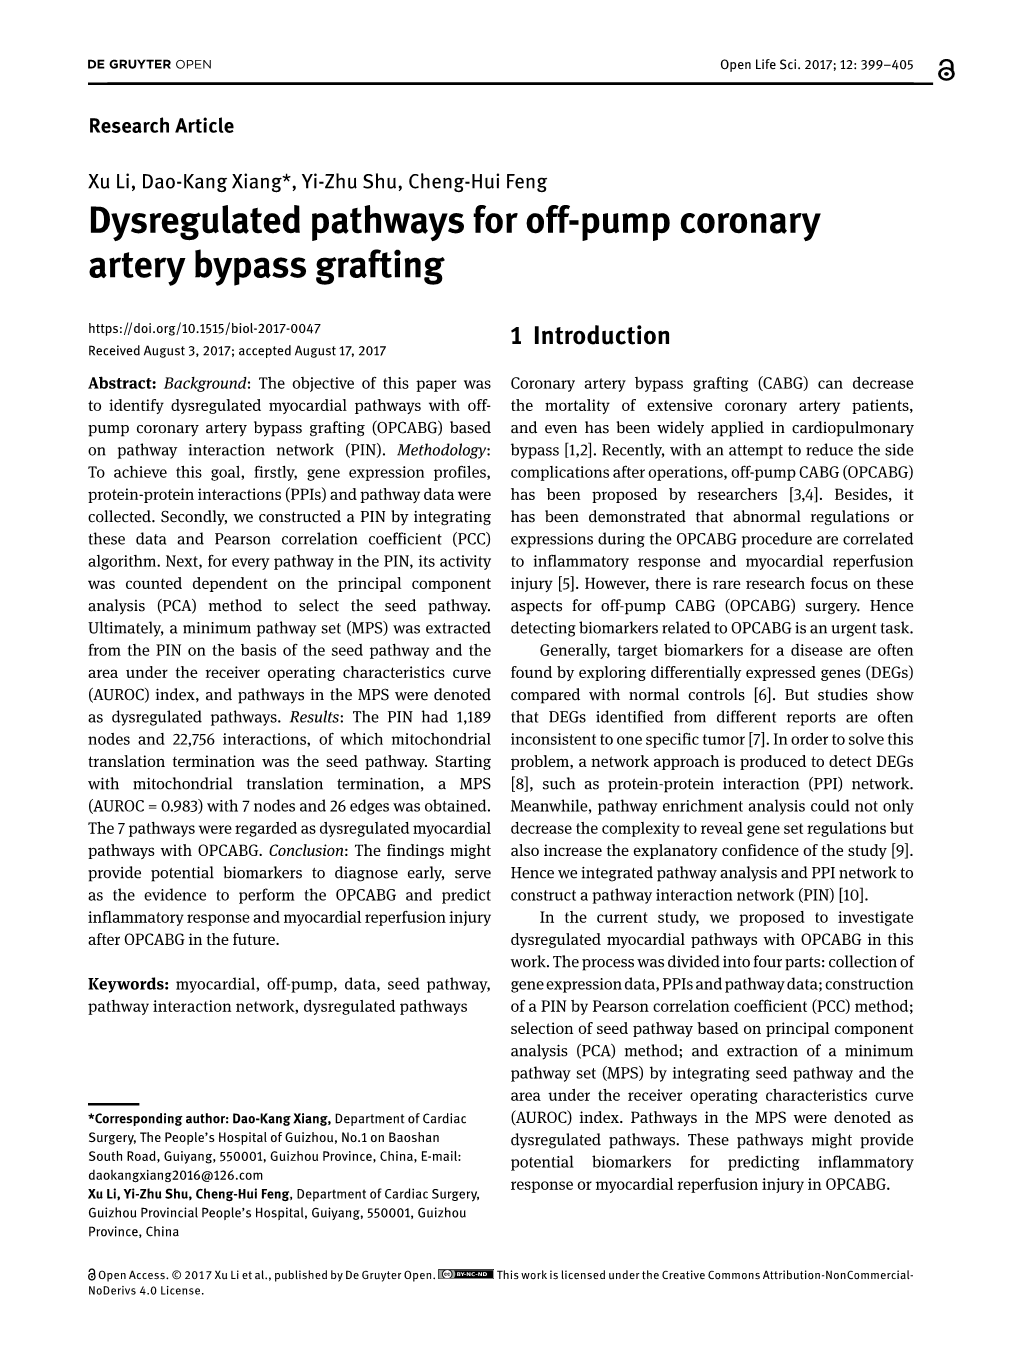 Dysregulated Pathways for Off-Pump Coronary Artery Bypass Grafting